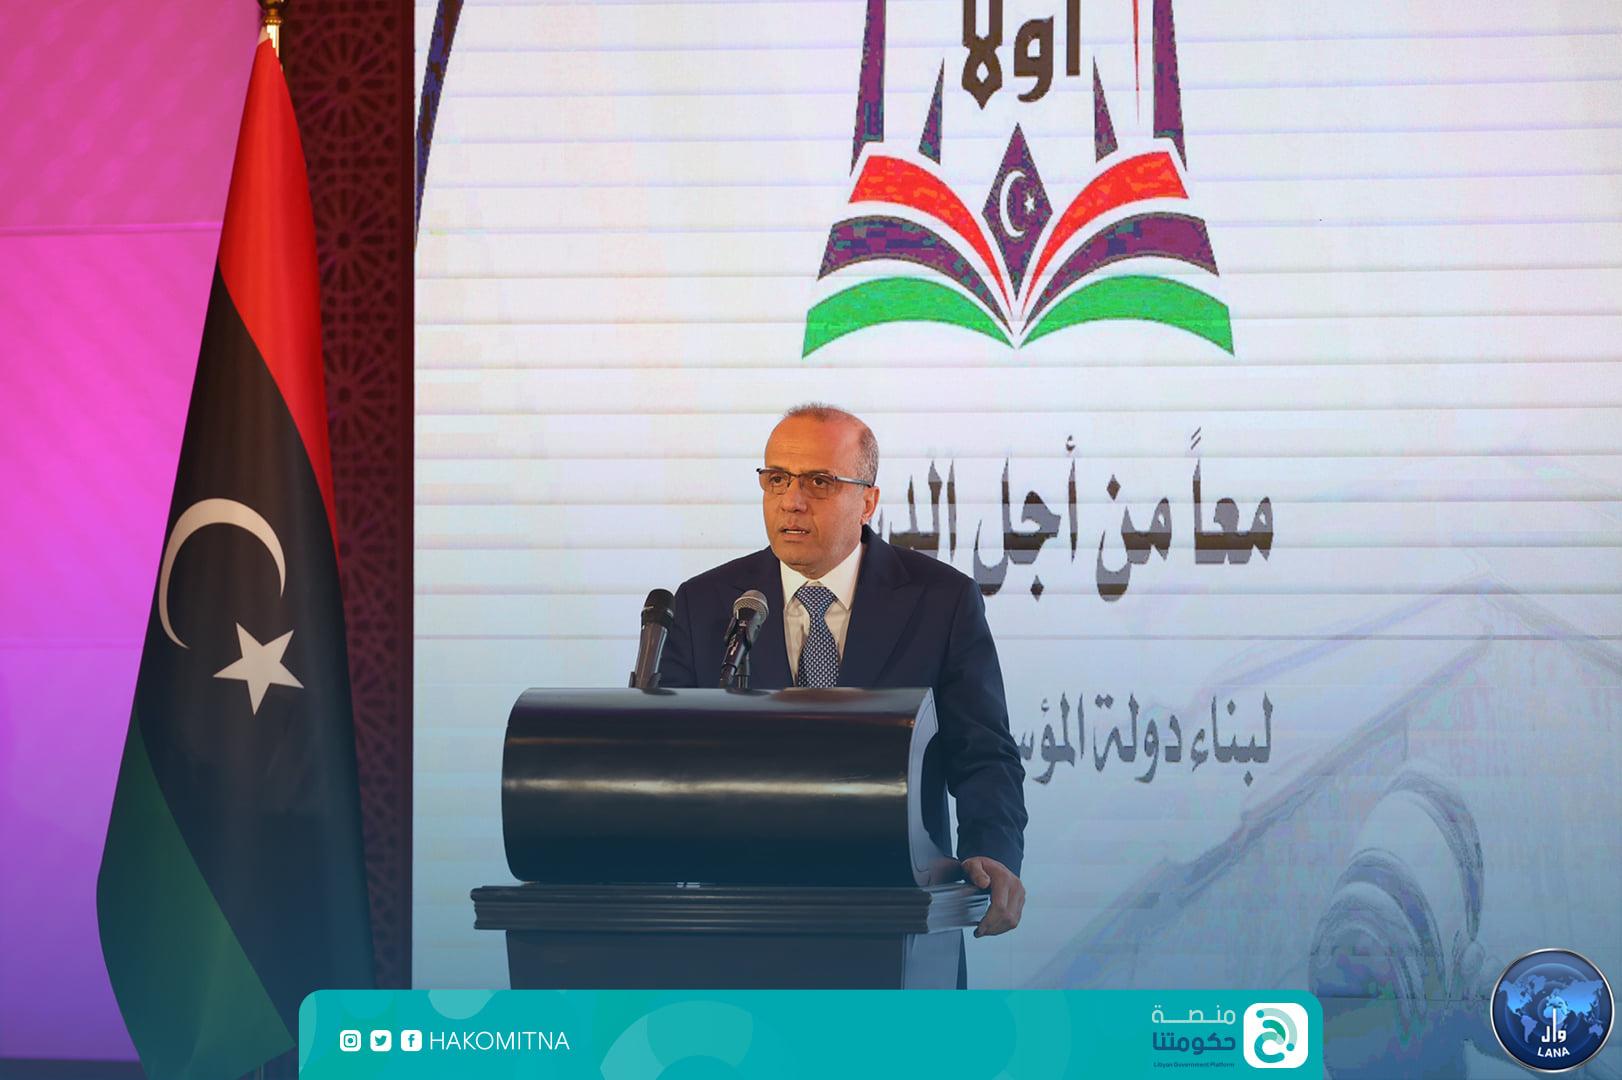 Al Lafi says Libyans eagerly await the election of the first president and do not want change through violence.